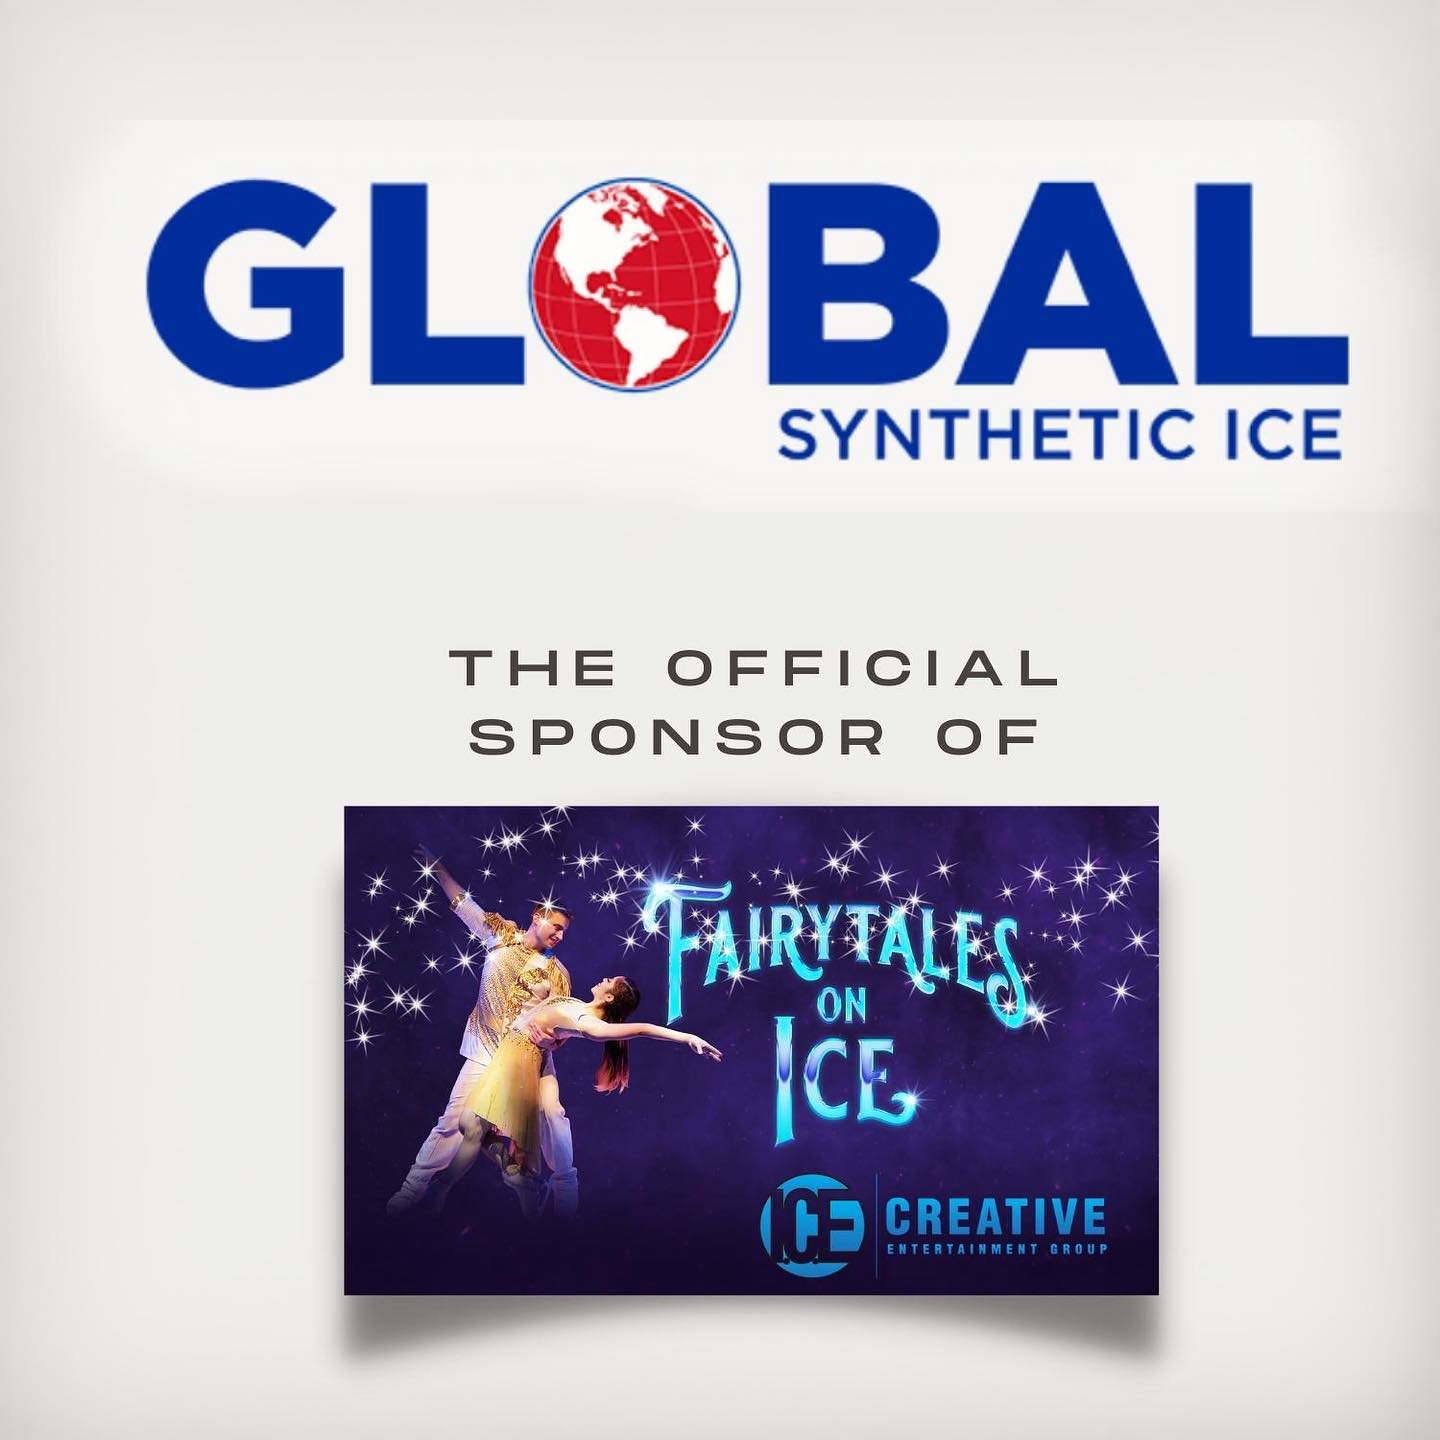 Global Synthetic Ice The official Sponsor